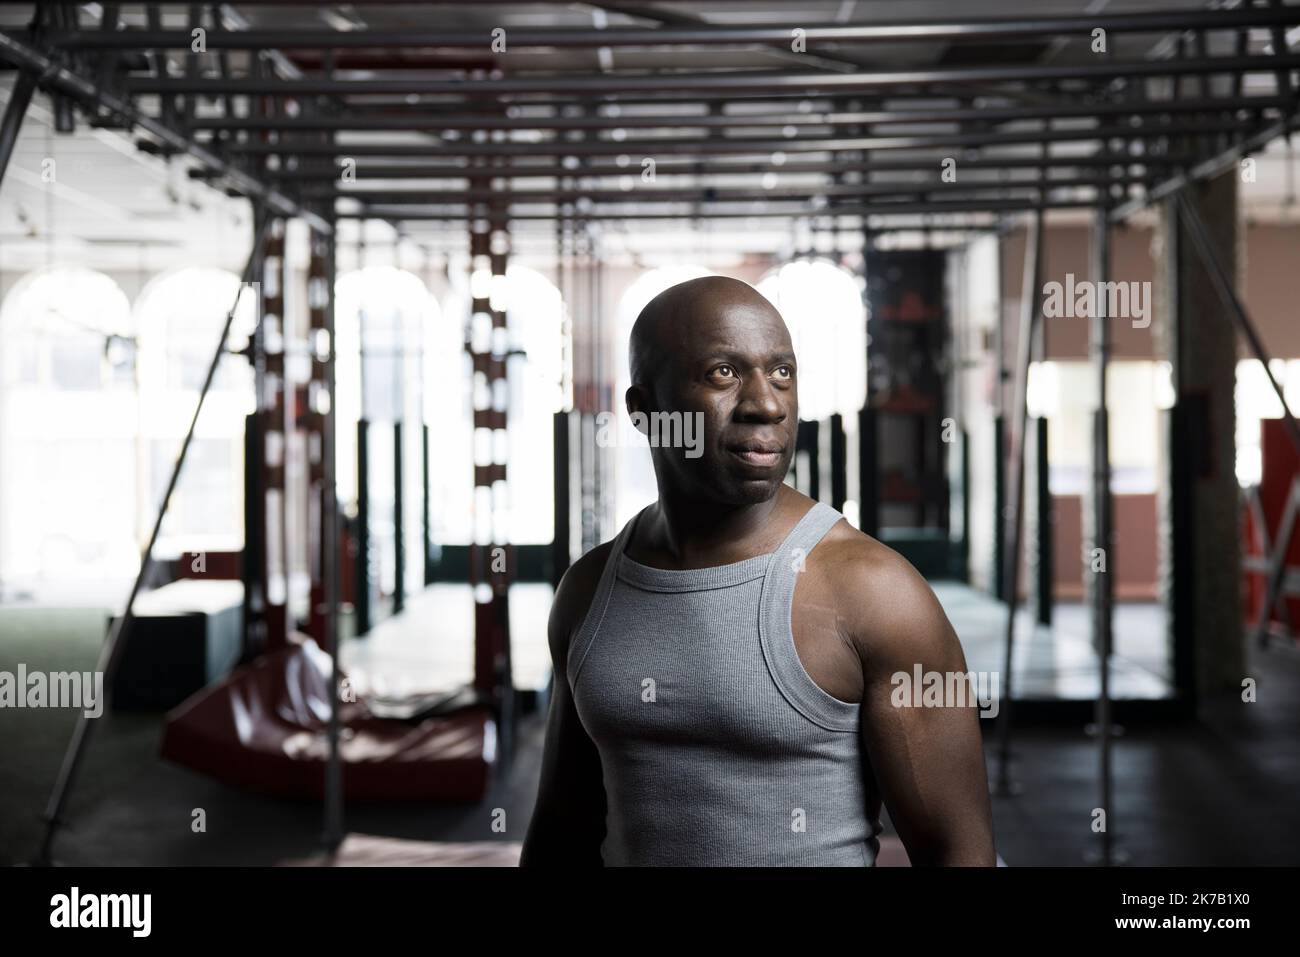 Portrait ambitious man in gym Stock Photo